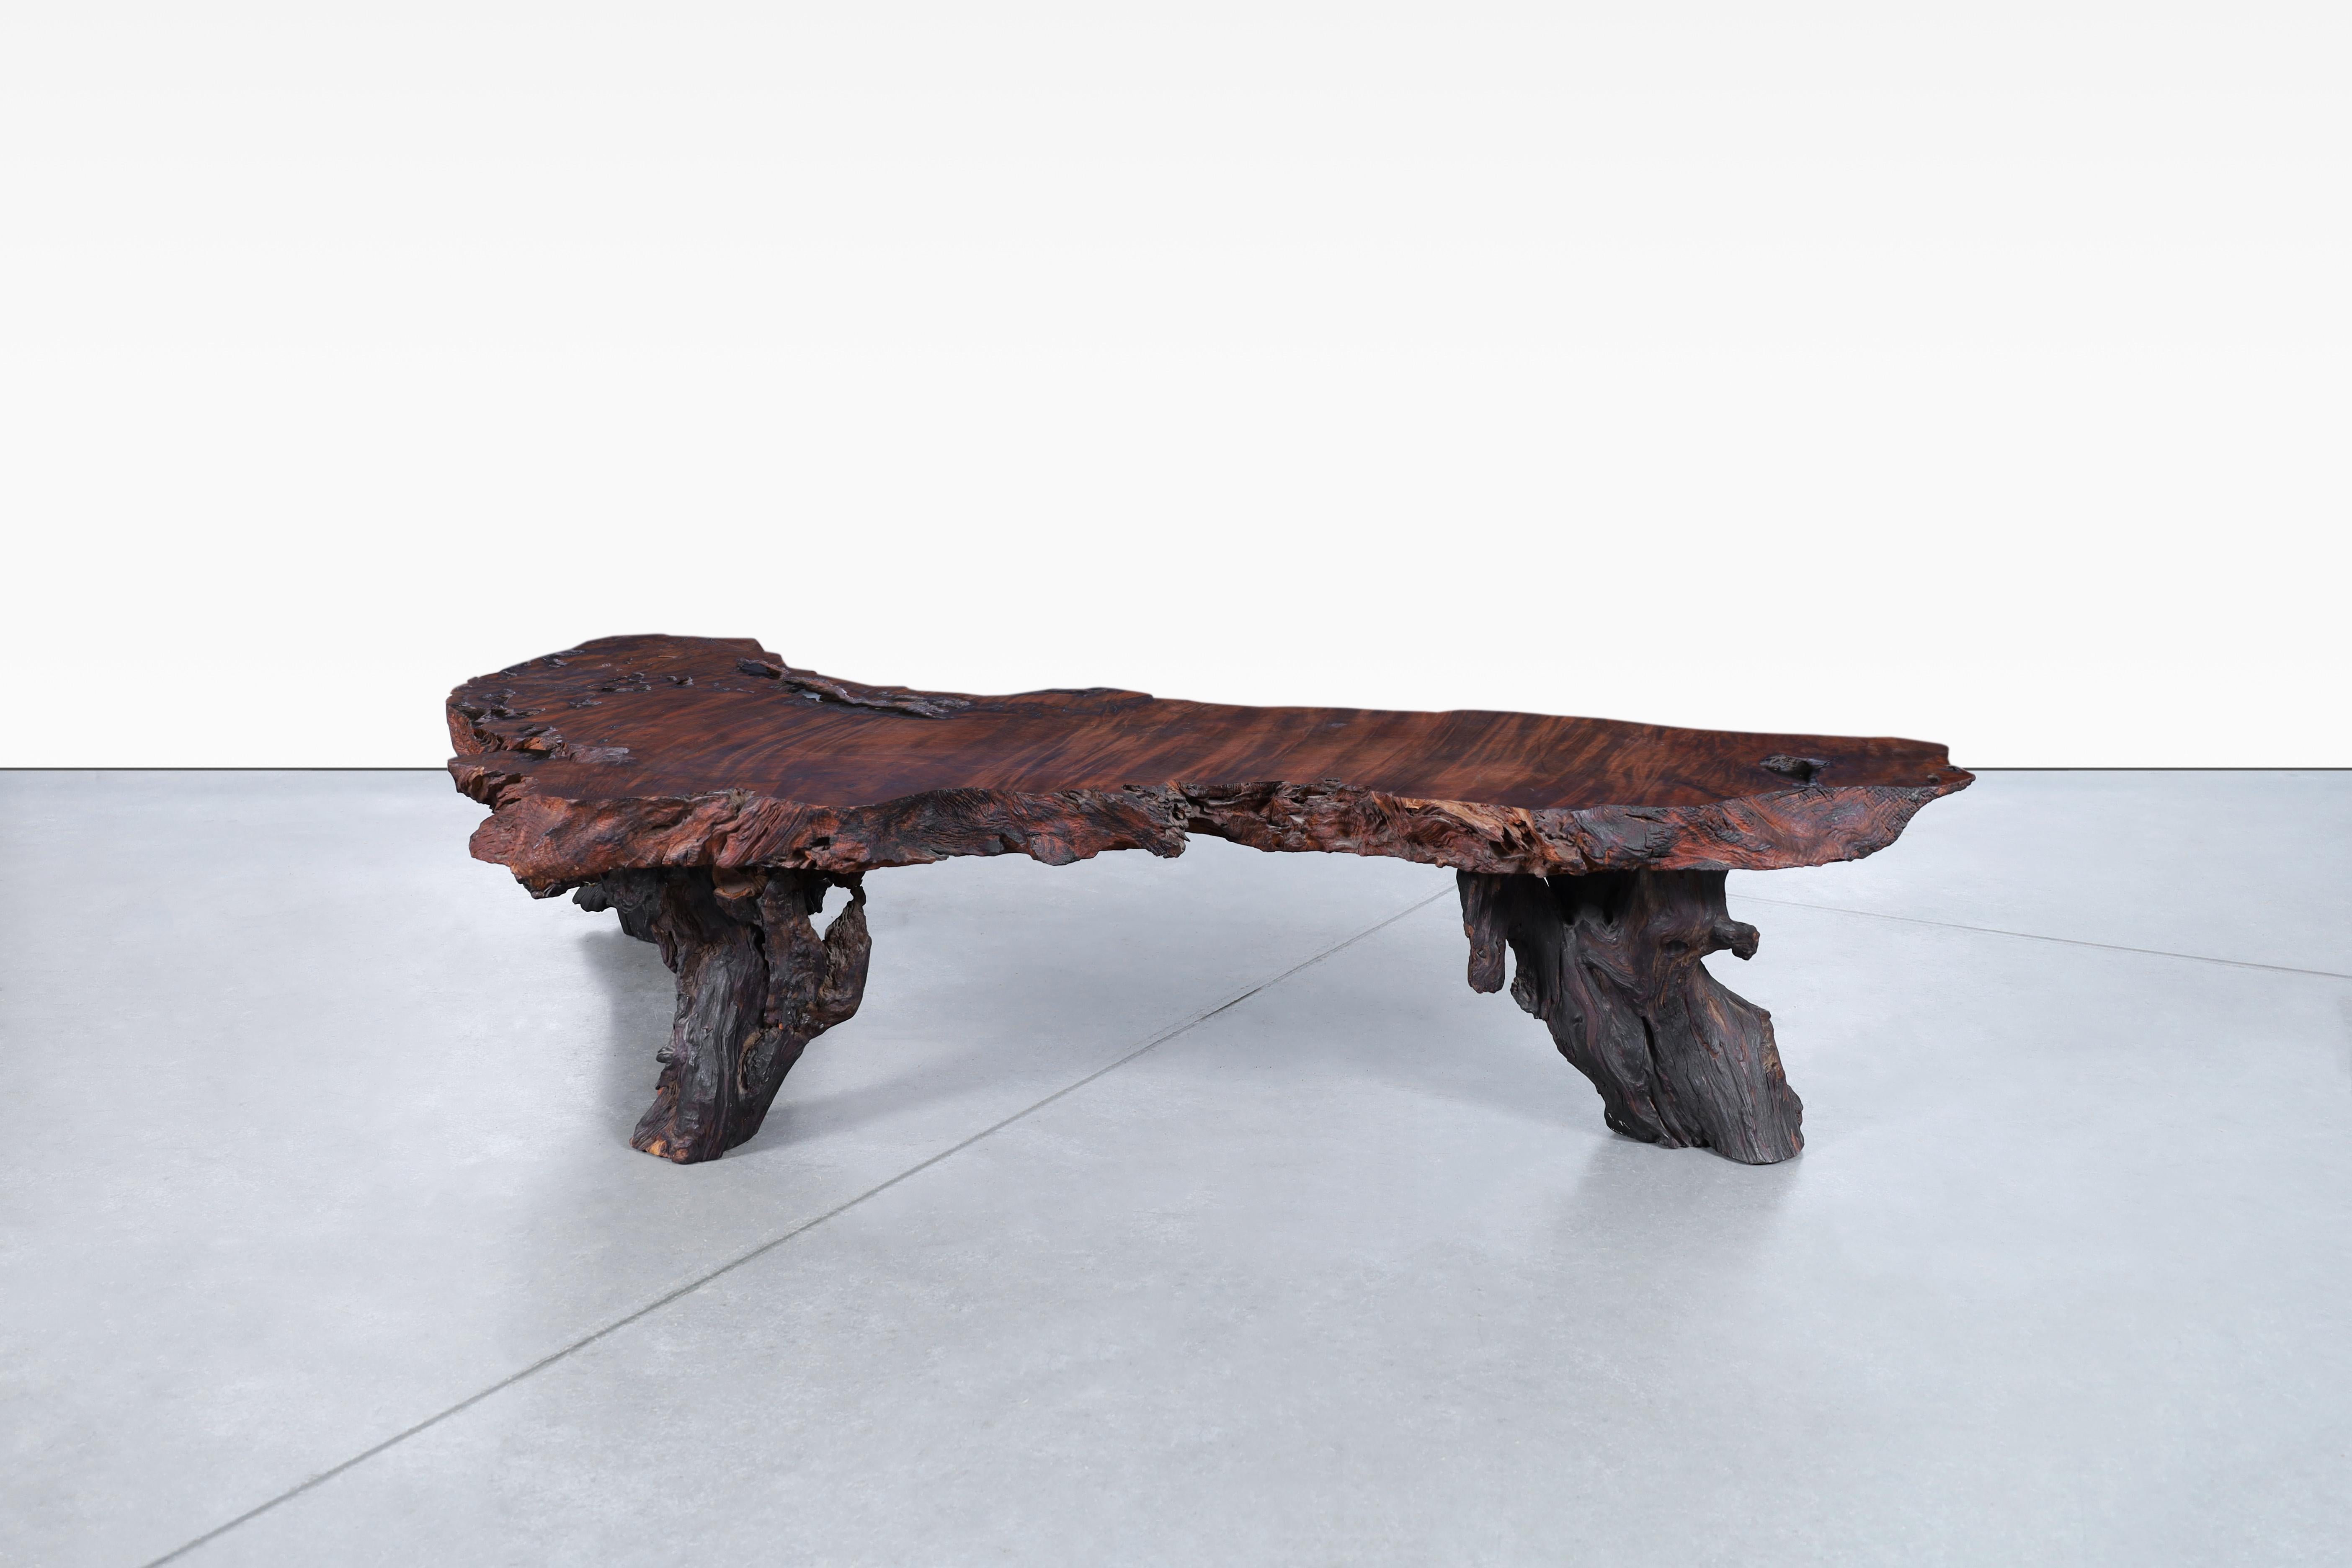 Beautiful vintage live edge redwood burl coffee table, designed in the United States, circa 1960s. This breathtaking redwood table is a one-of-a-kind masterpiece, handcrafted to perfection. The live edge design captures the raw, unrefined essence of